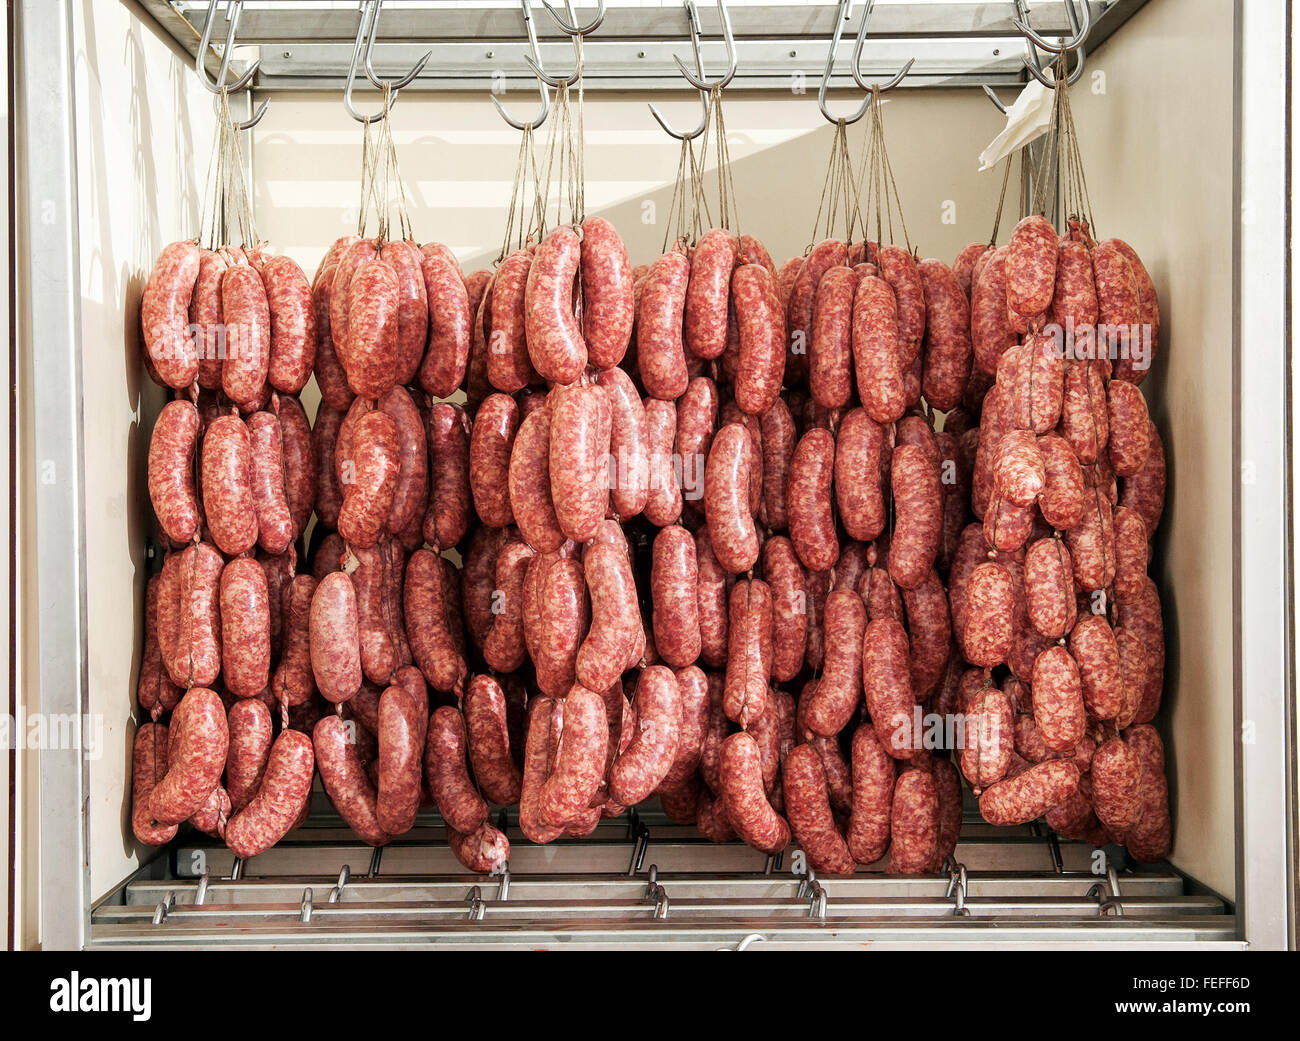 Freshly made sausages maturing in a cool room in a butchery hanging from hooks in a cabinet Stock Photo